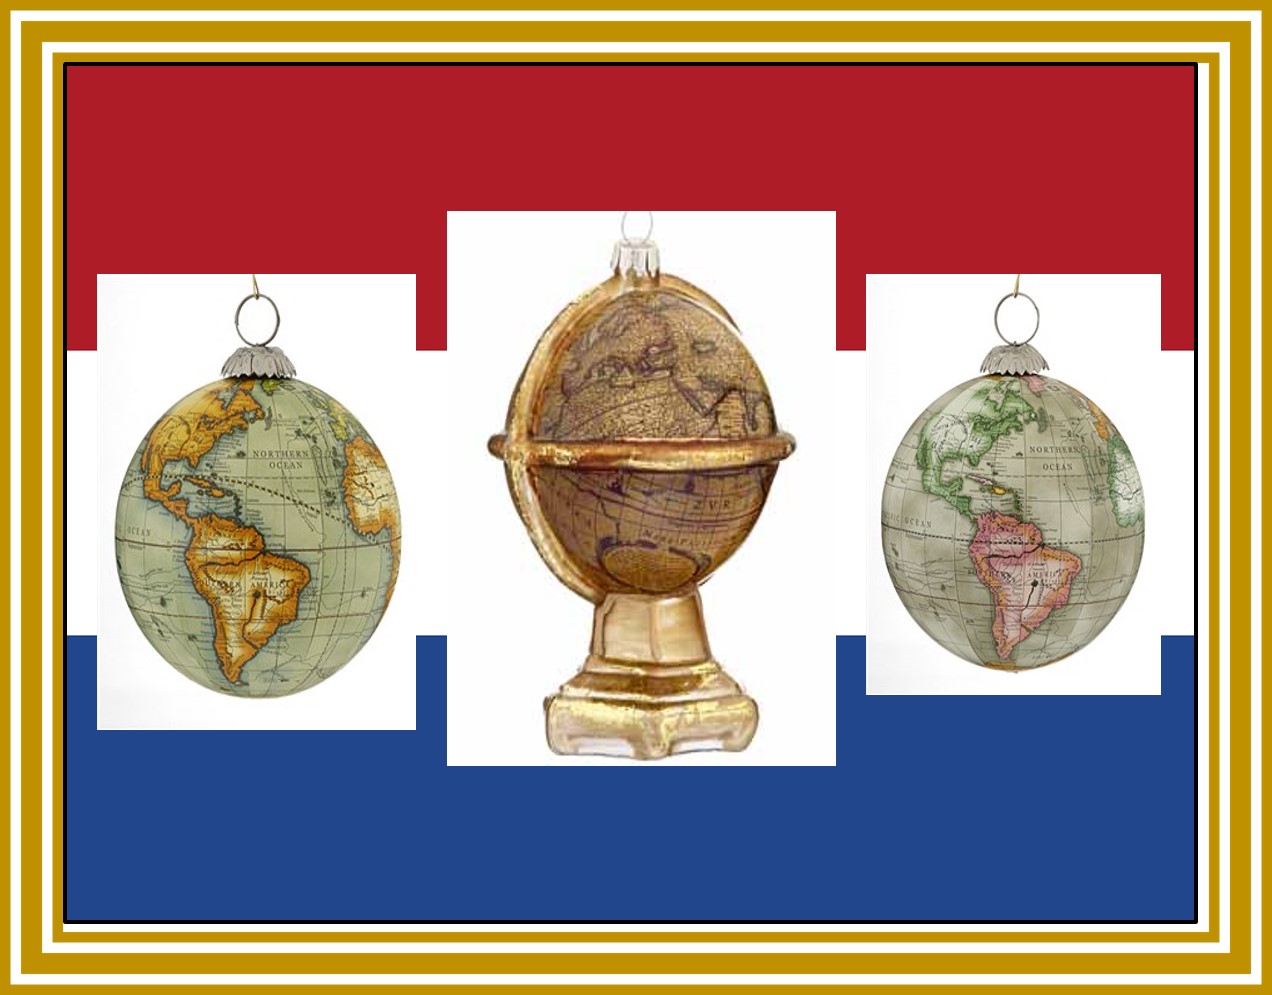 Ornaments of authentic globes and maps for people who love to travel. | OrnamentShop.com